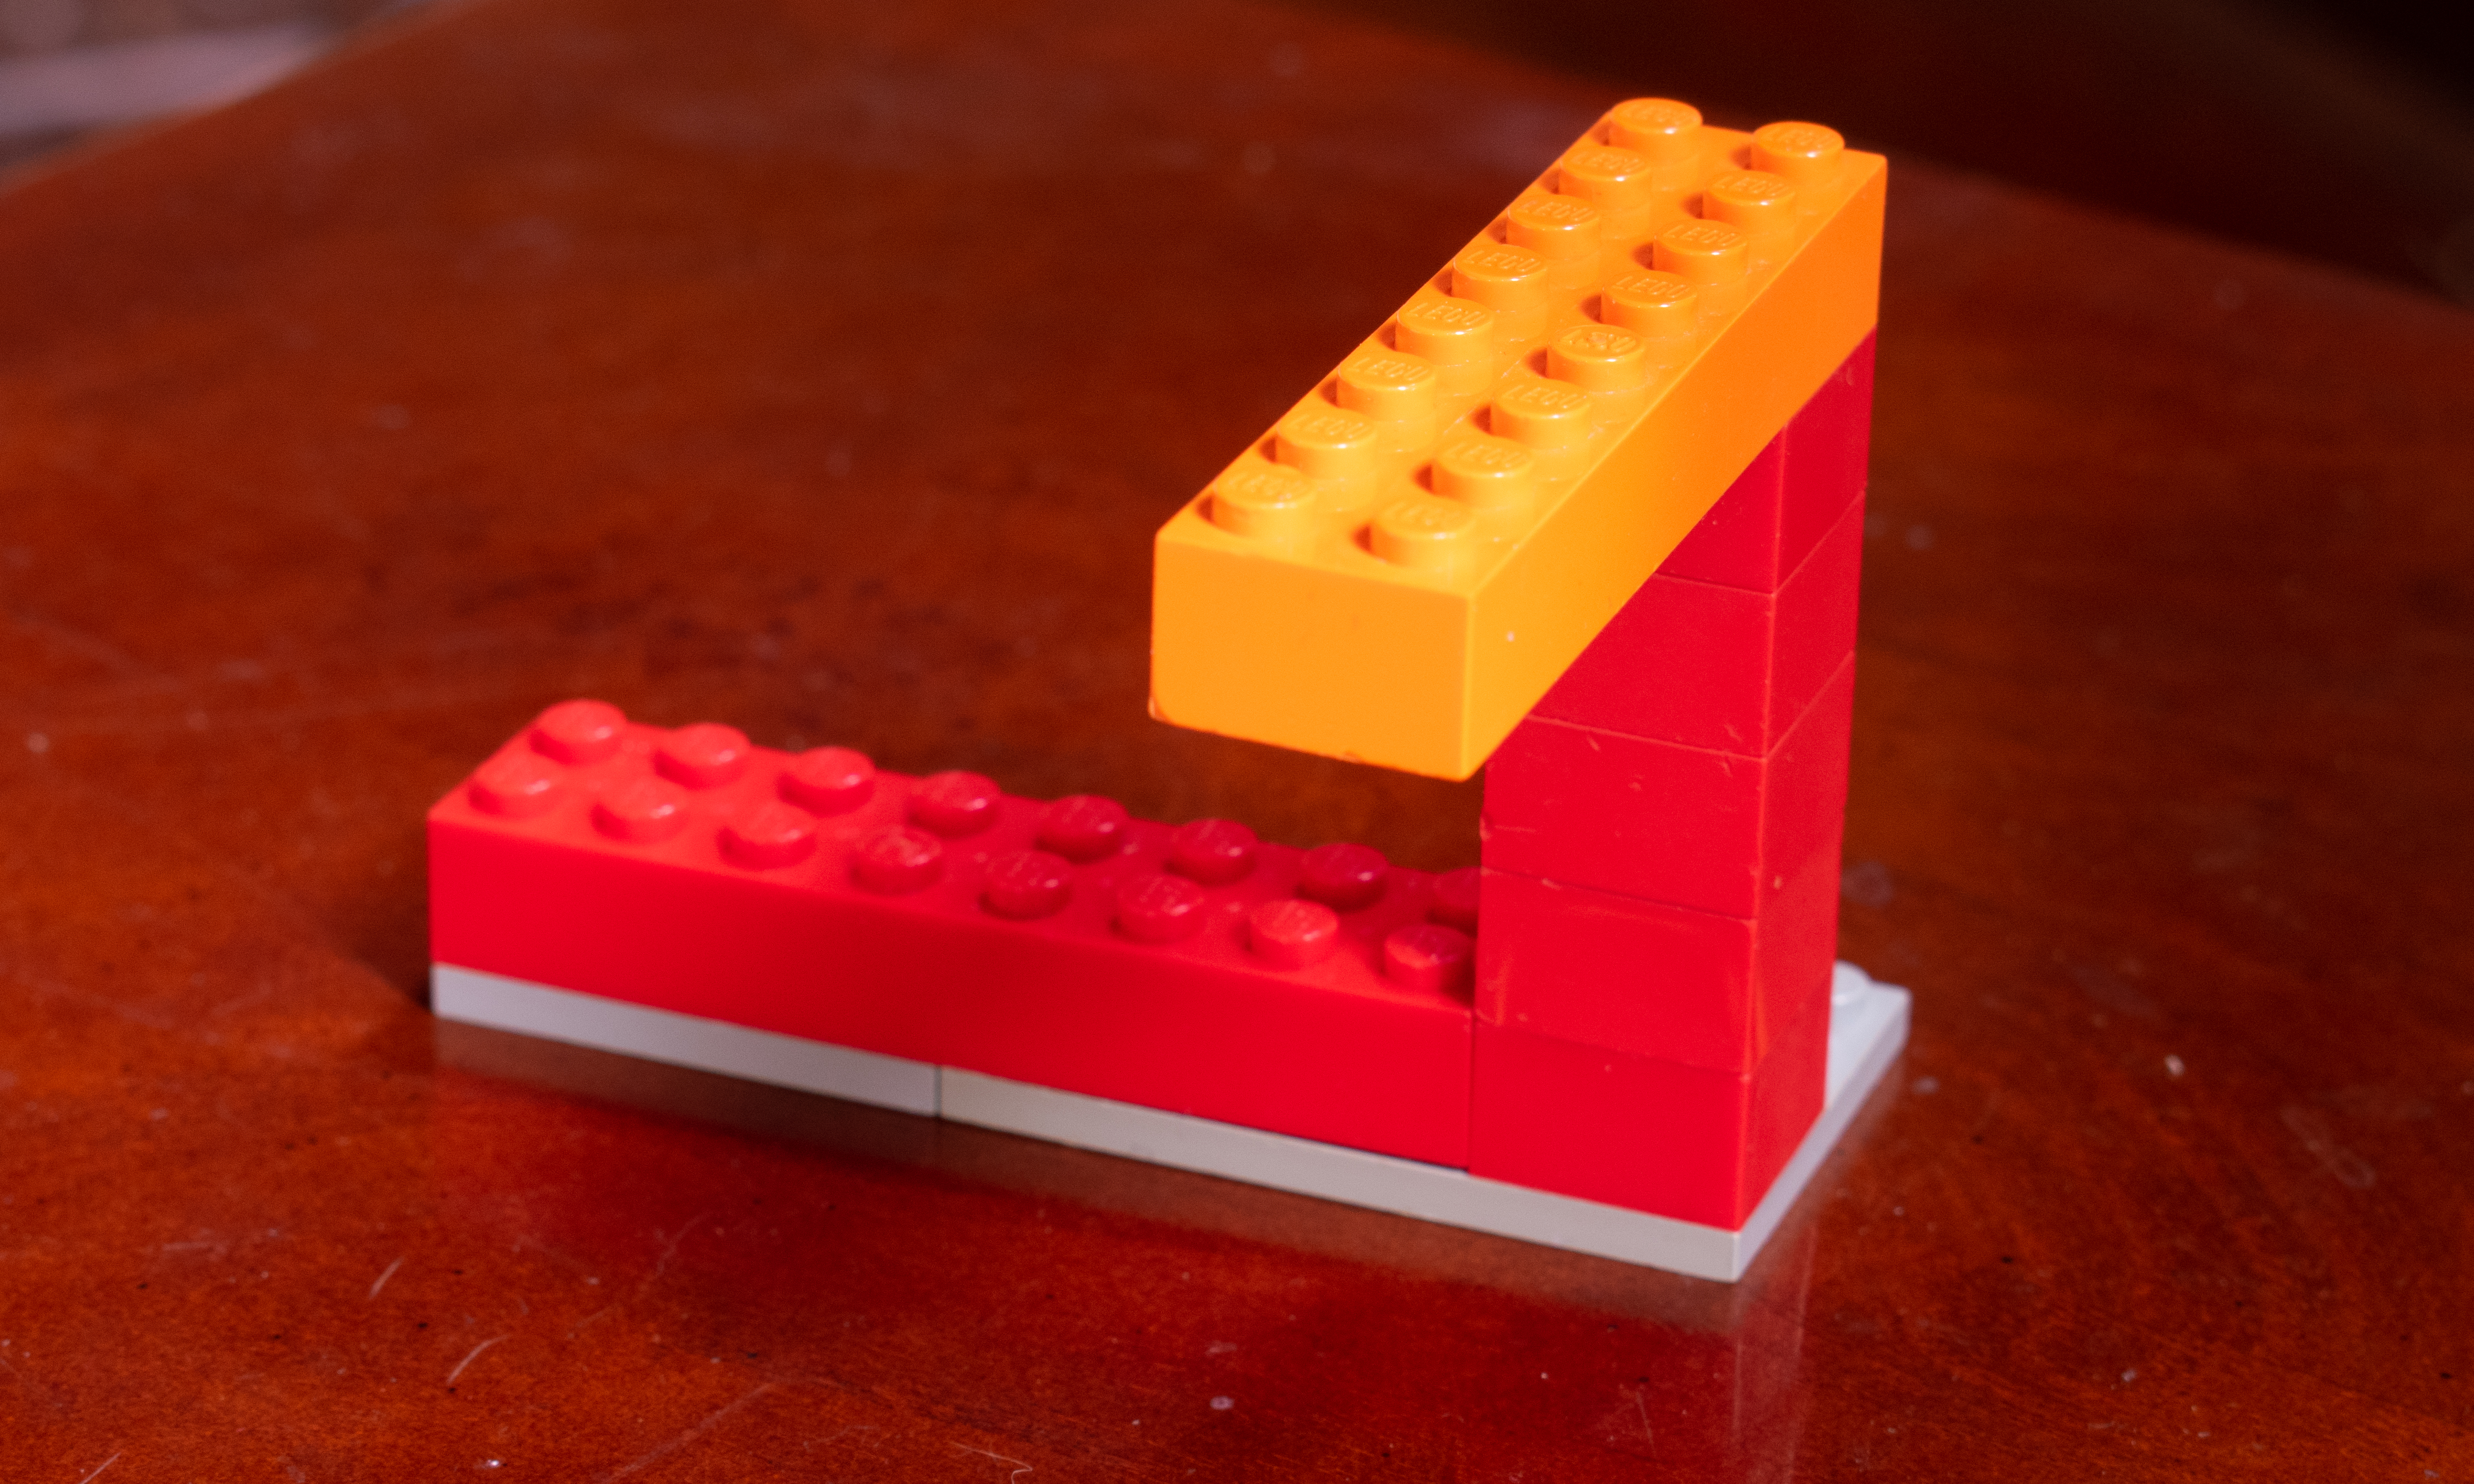 An impossible triangle built out of lego revealed.